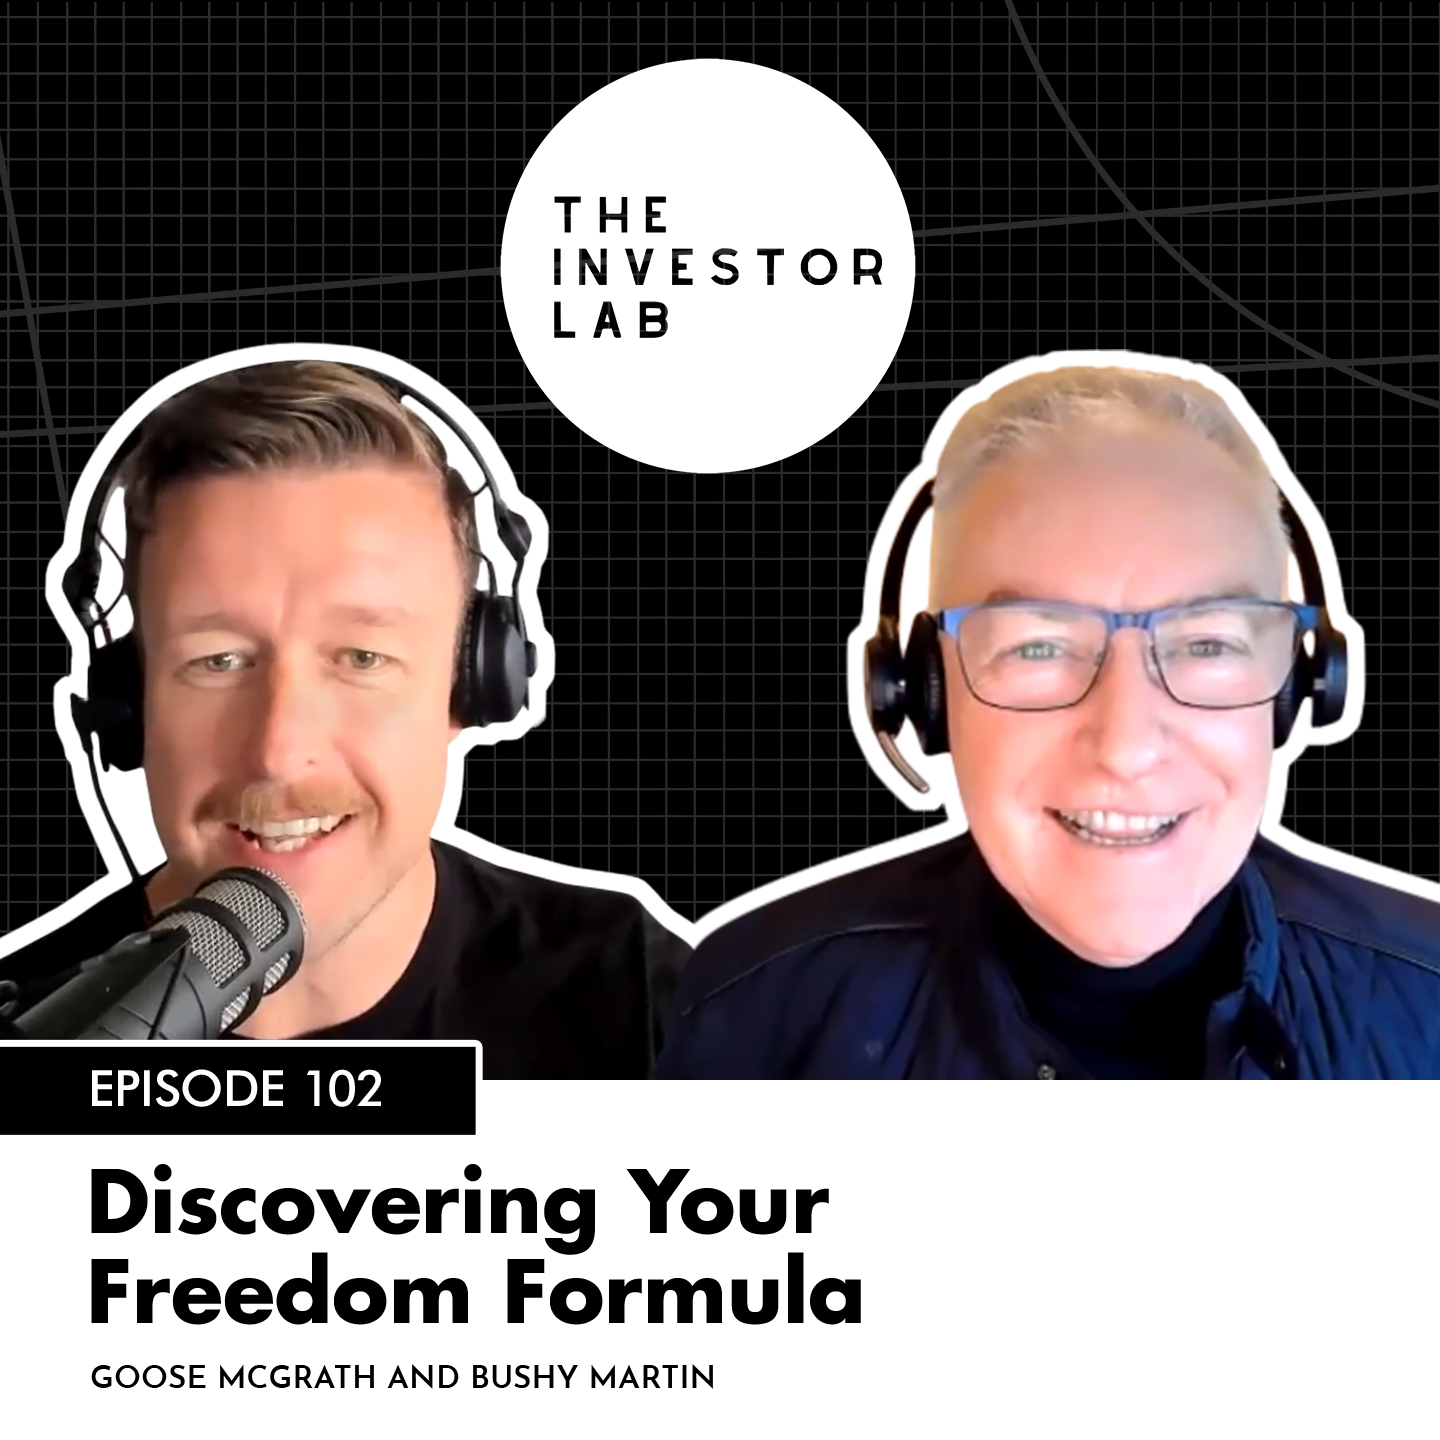 Discovering Your Freedom Formula with Bushy Martin